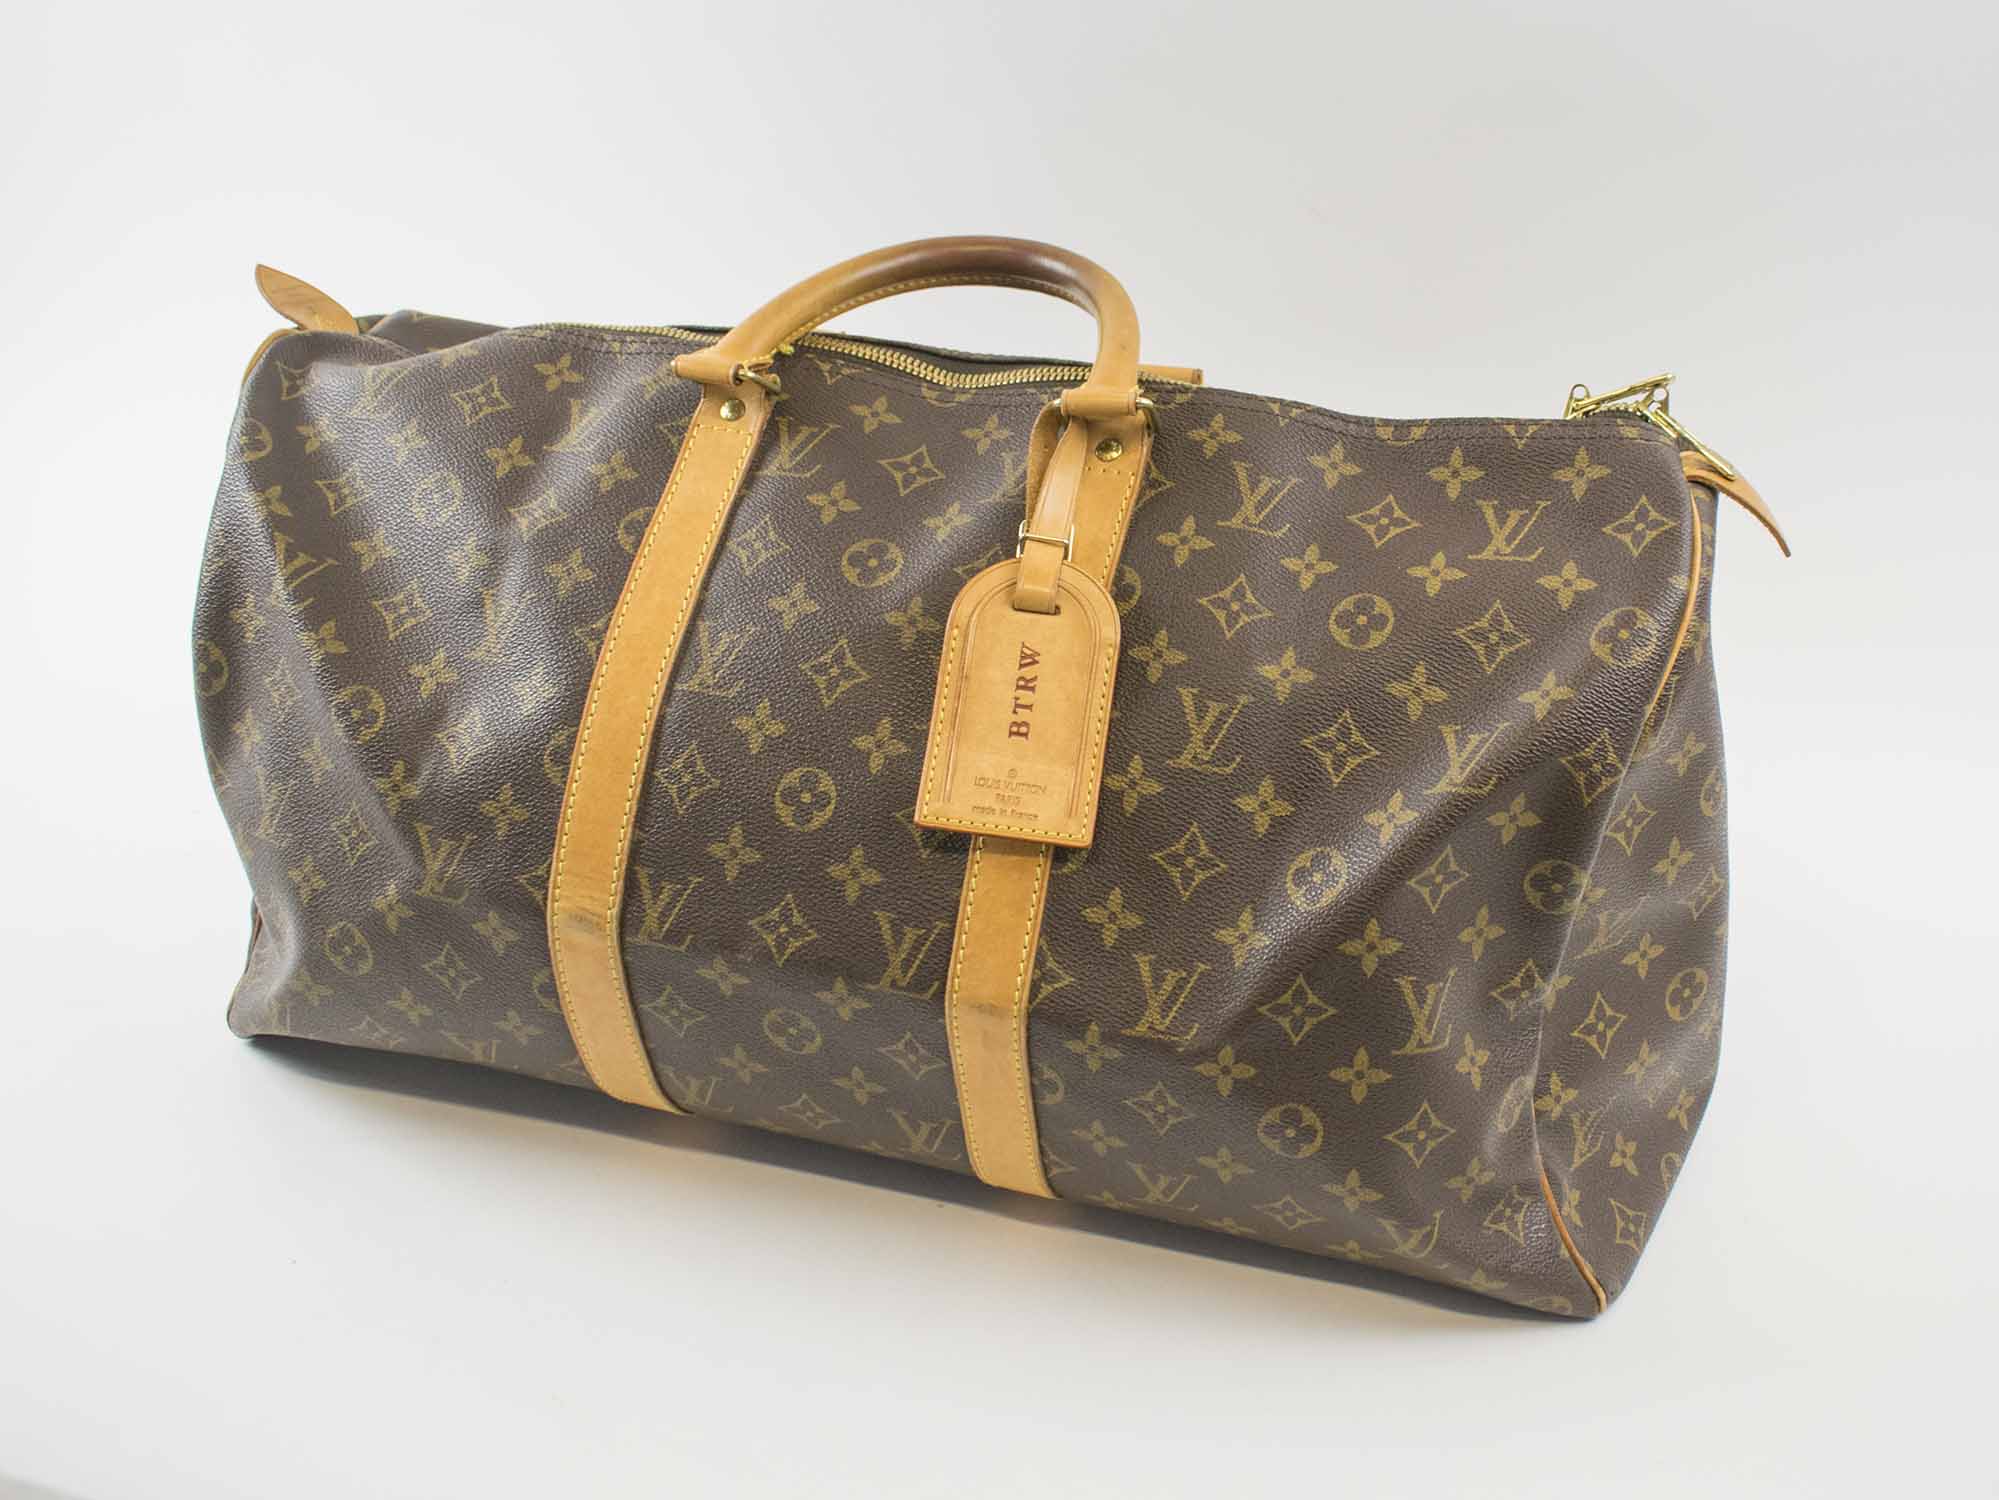 LOUIS VUITTON KEEPALL 50 TRAVEL BAG, monogram canvas with full top double zip closure, two top ...